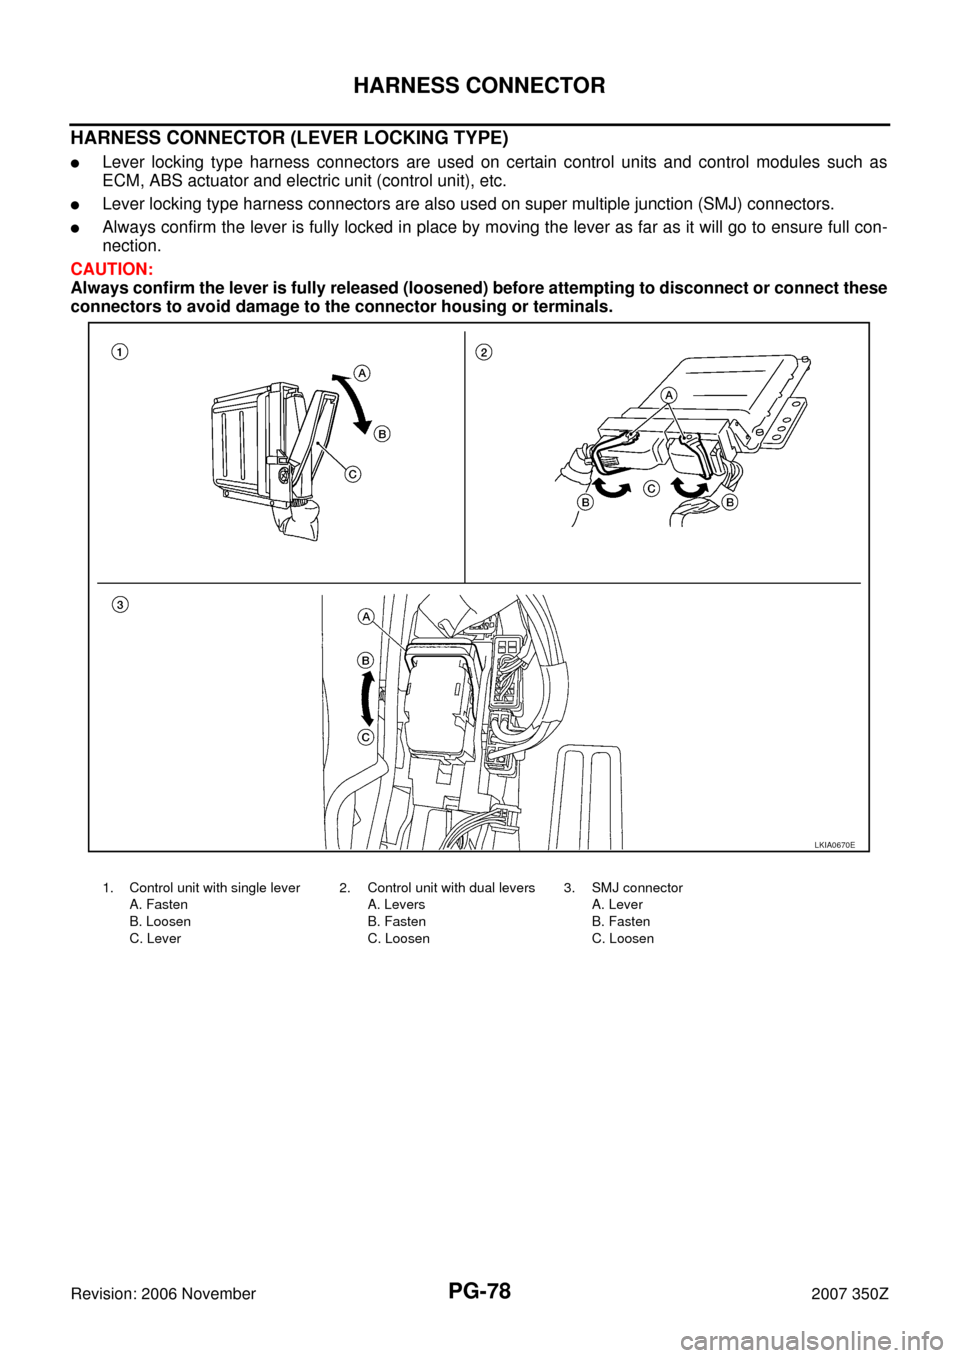 NISSAN 350Z 2007 Z33 Power Supply, Ground And Circuit Manual PDF PG-78
HARNESS CONNECTOR
Revision: 2006 November2007 350Z
HARNESS CONNECTOR (LEVER LOCKING TYPE)
Lever locking type harness connectors are used on certain control units and control modules such as
ECM